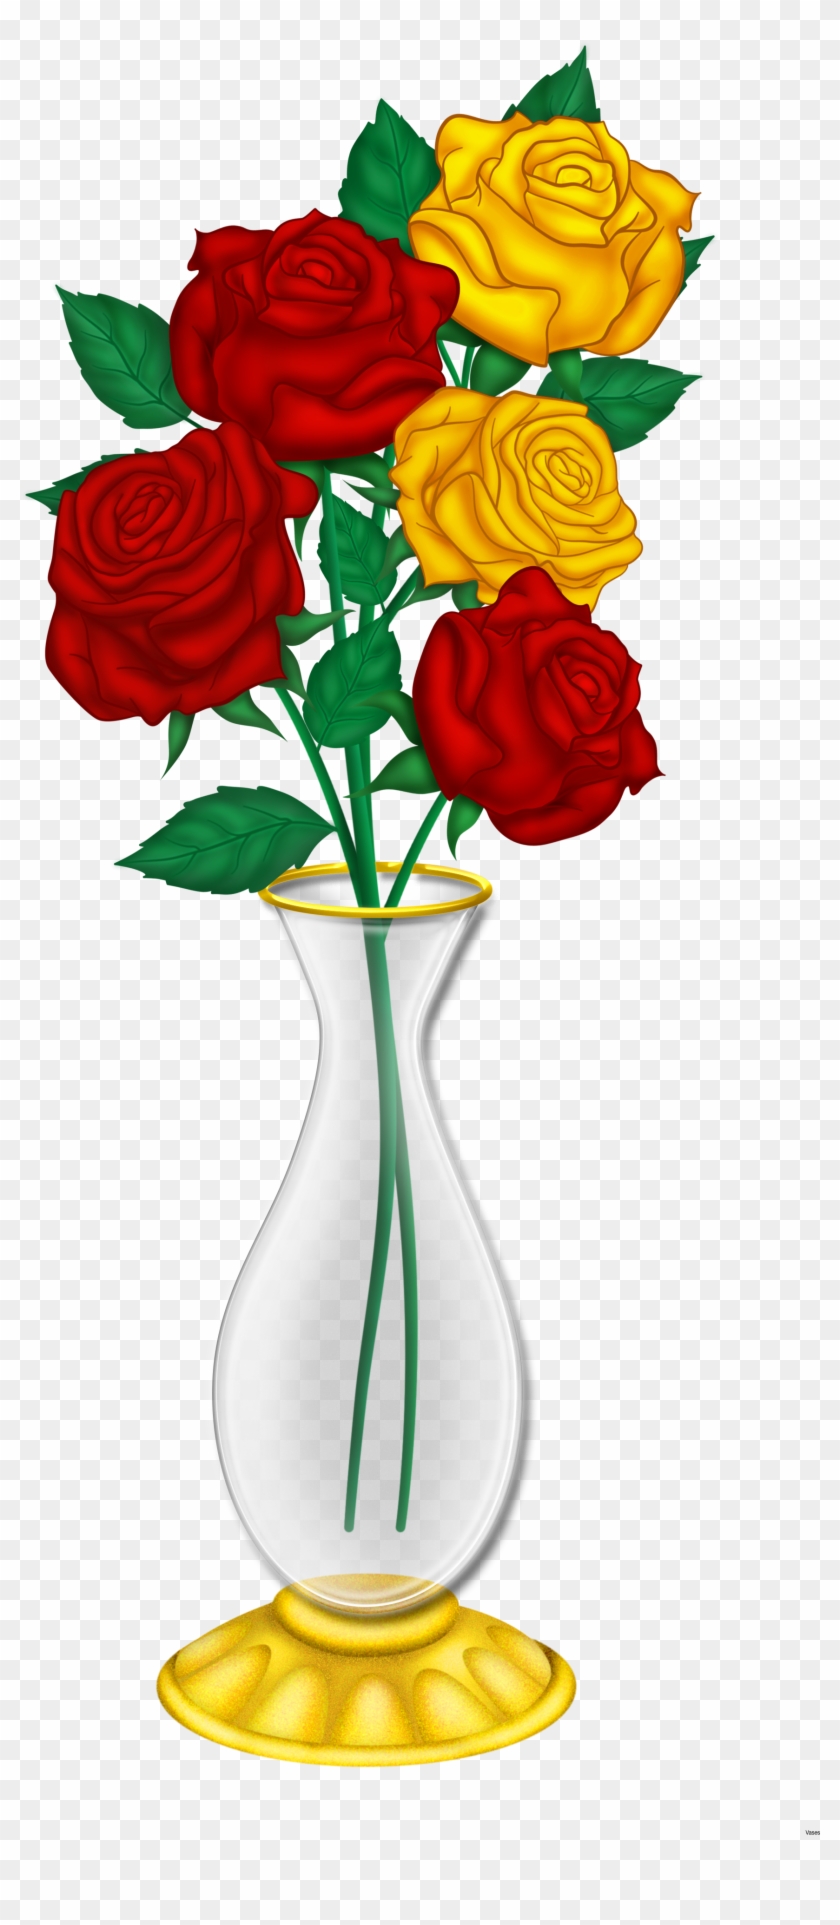 Ruin Clipart Vase - Roses In A Vase Clipart #826653